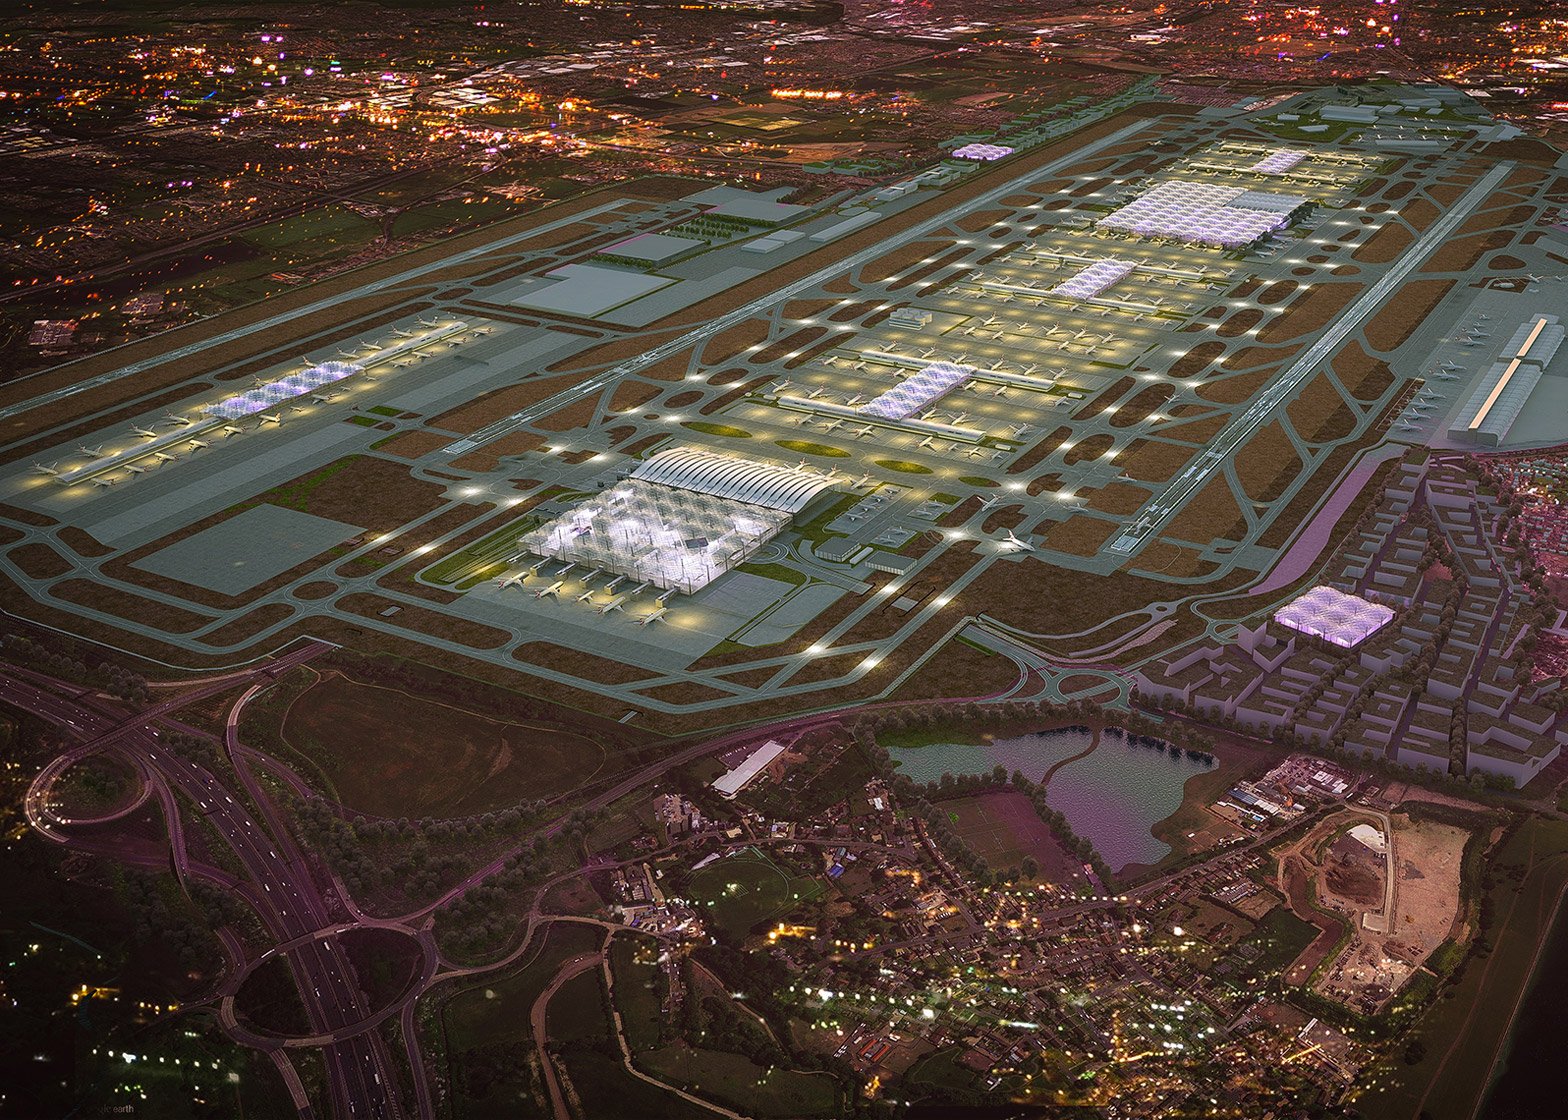 Grimshaw unveils vision to expand London's Heathrow Airport